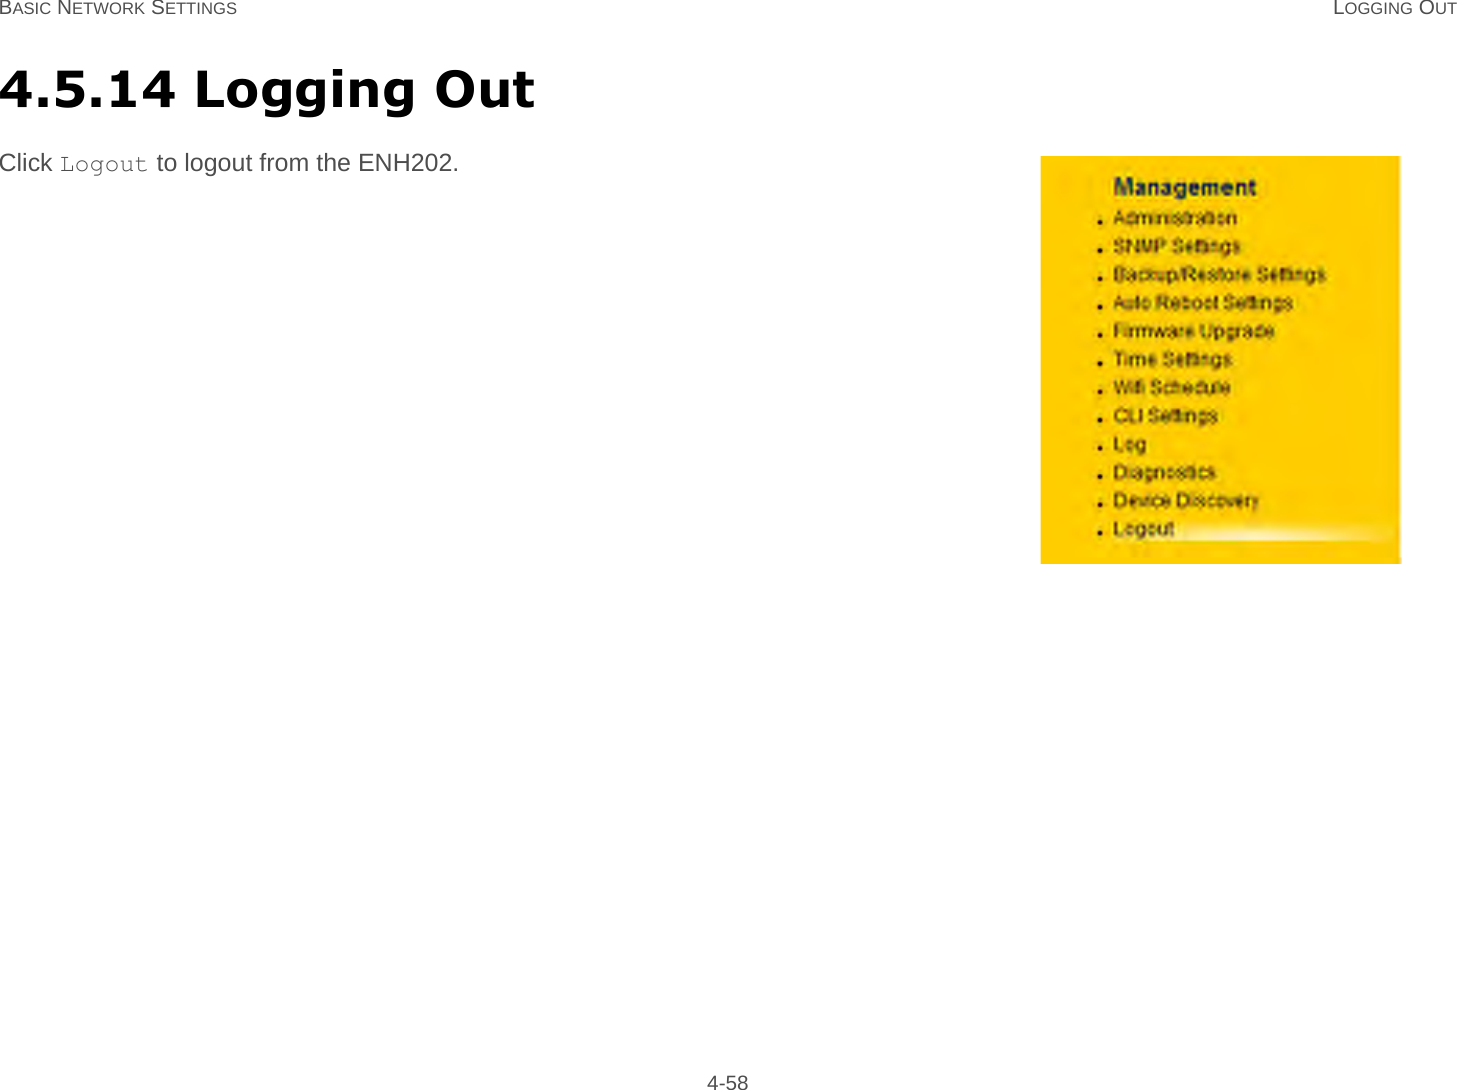 BASIC NETWORK SETTINGS LOGGING OUT 4-584.5.14 Logging OutClick Logout to logout from the ENH202.